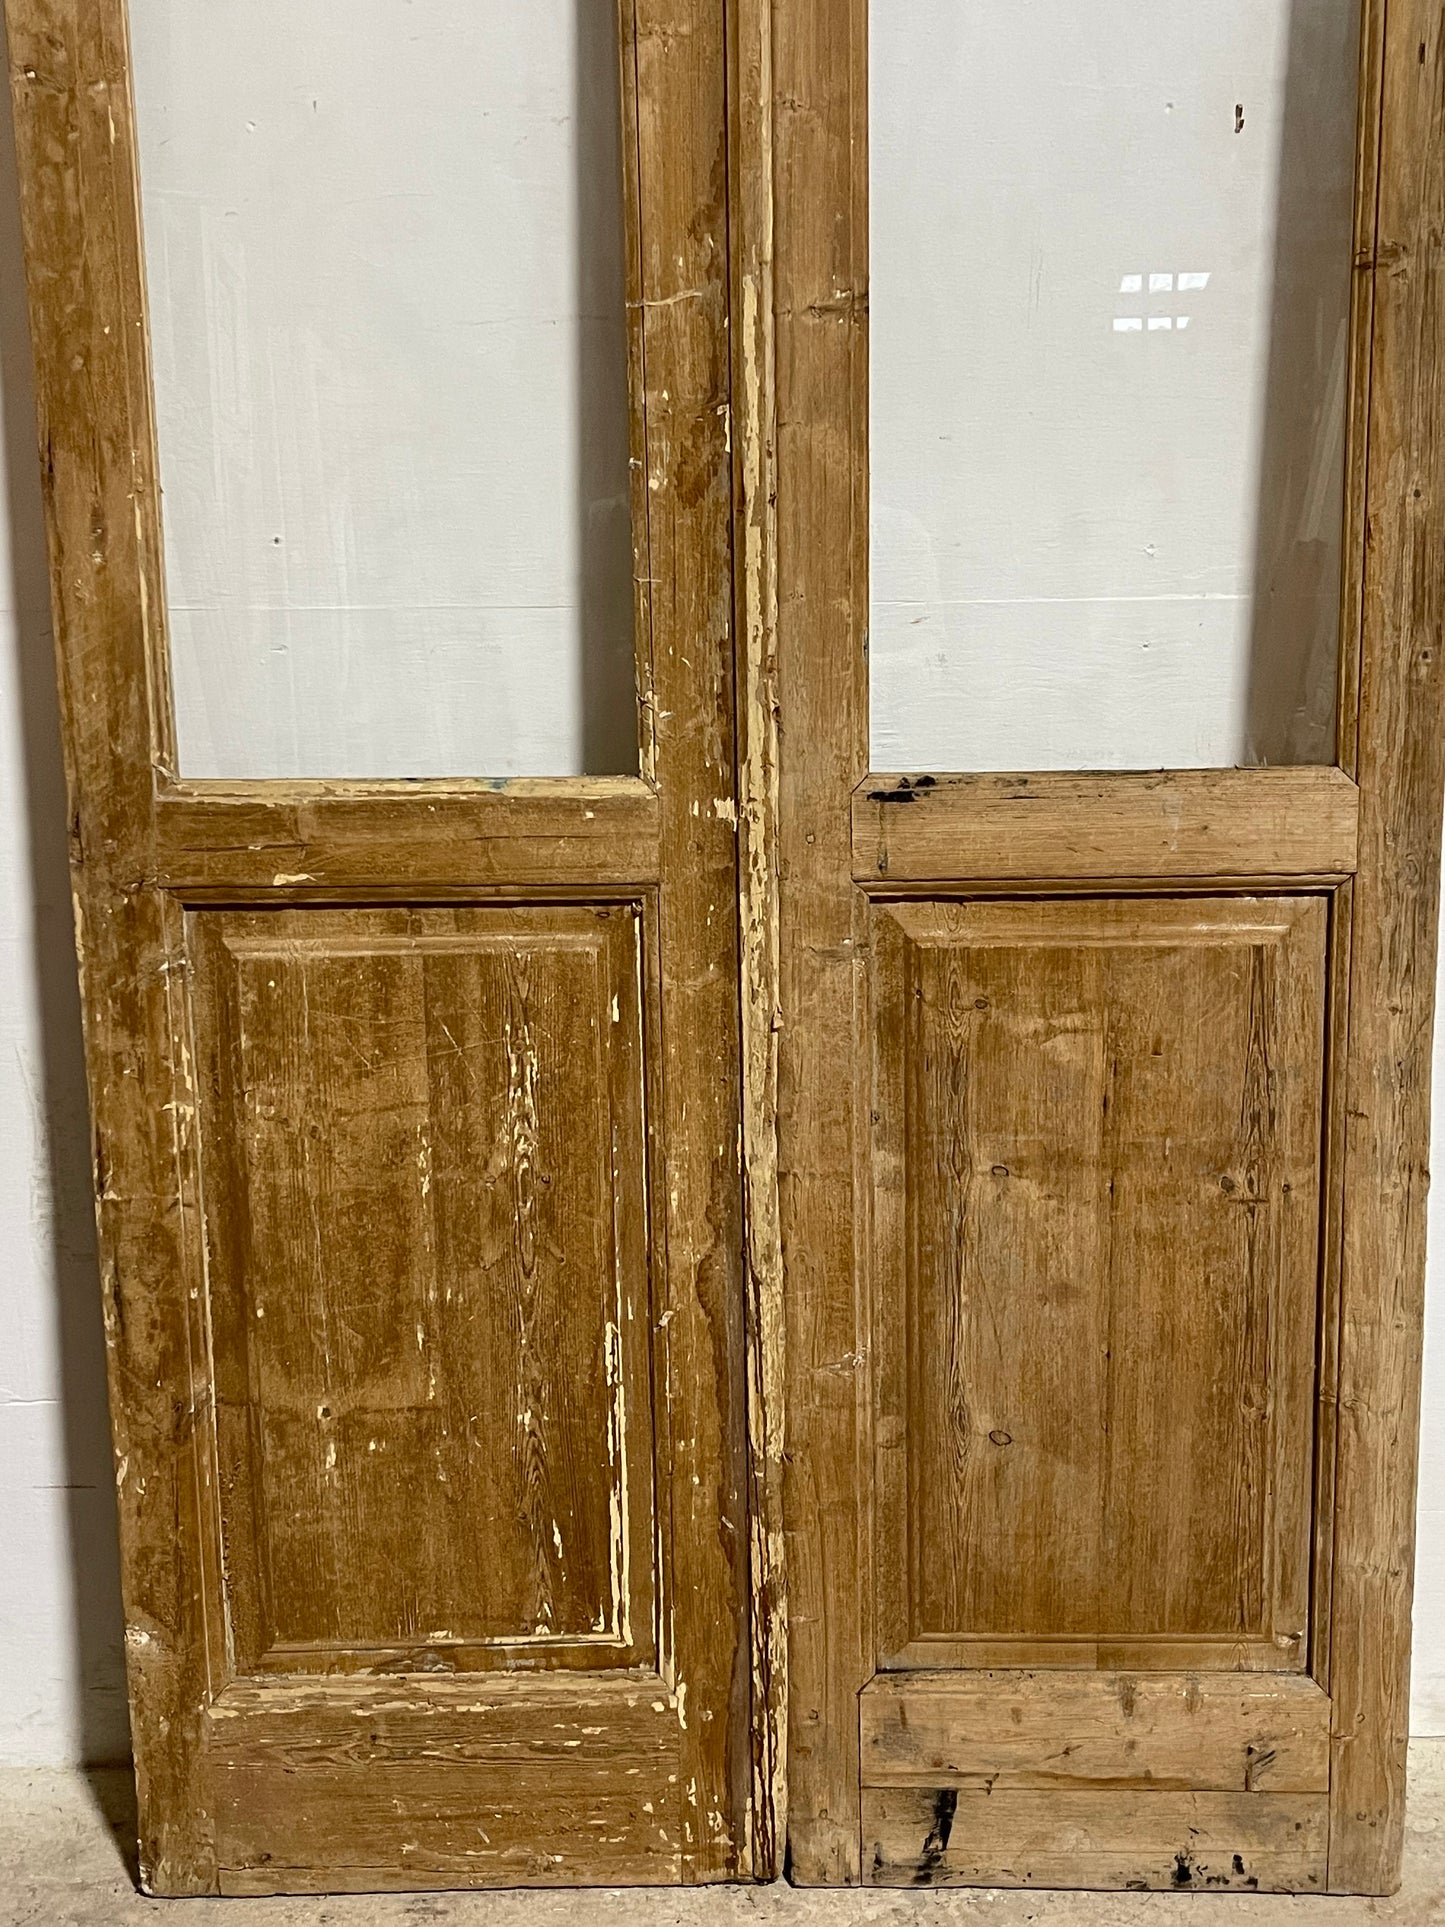 Antique French Panel Doors with glass  (100x48)  K307